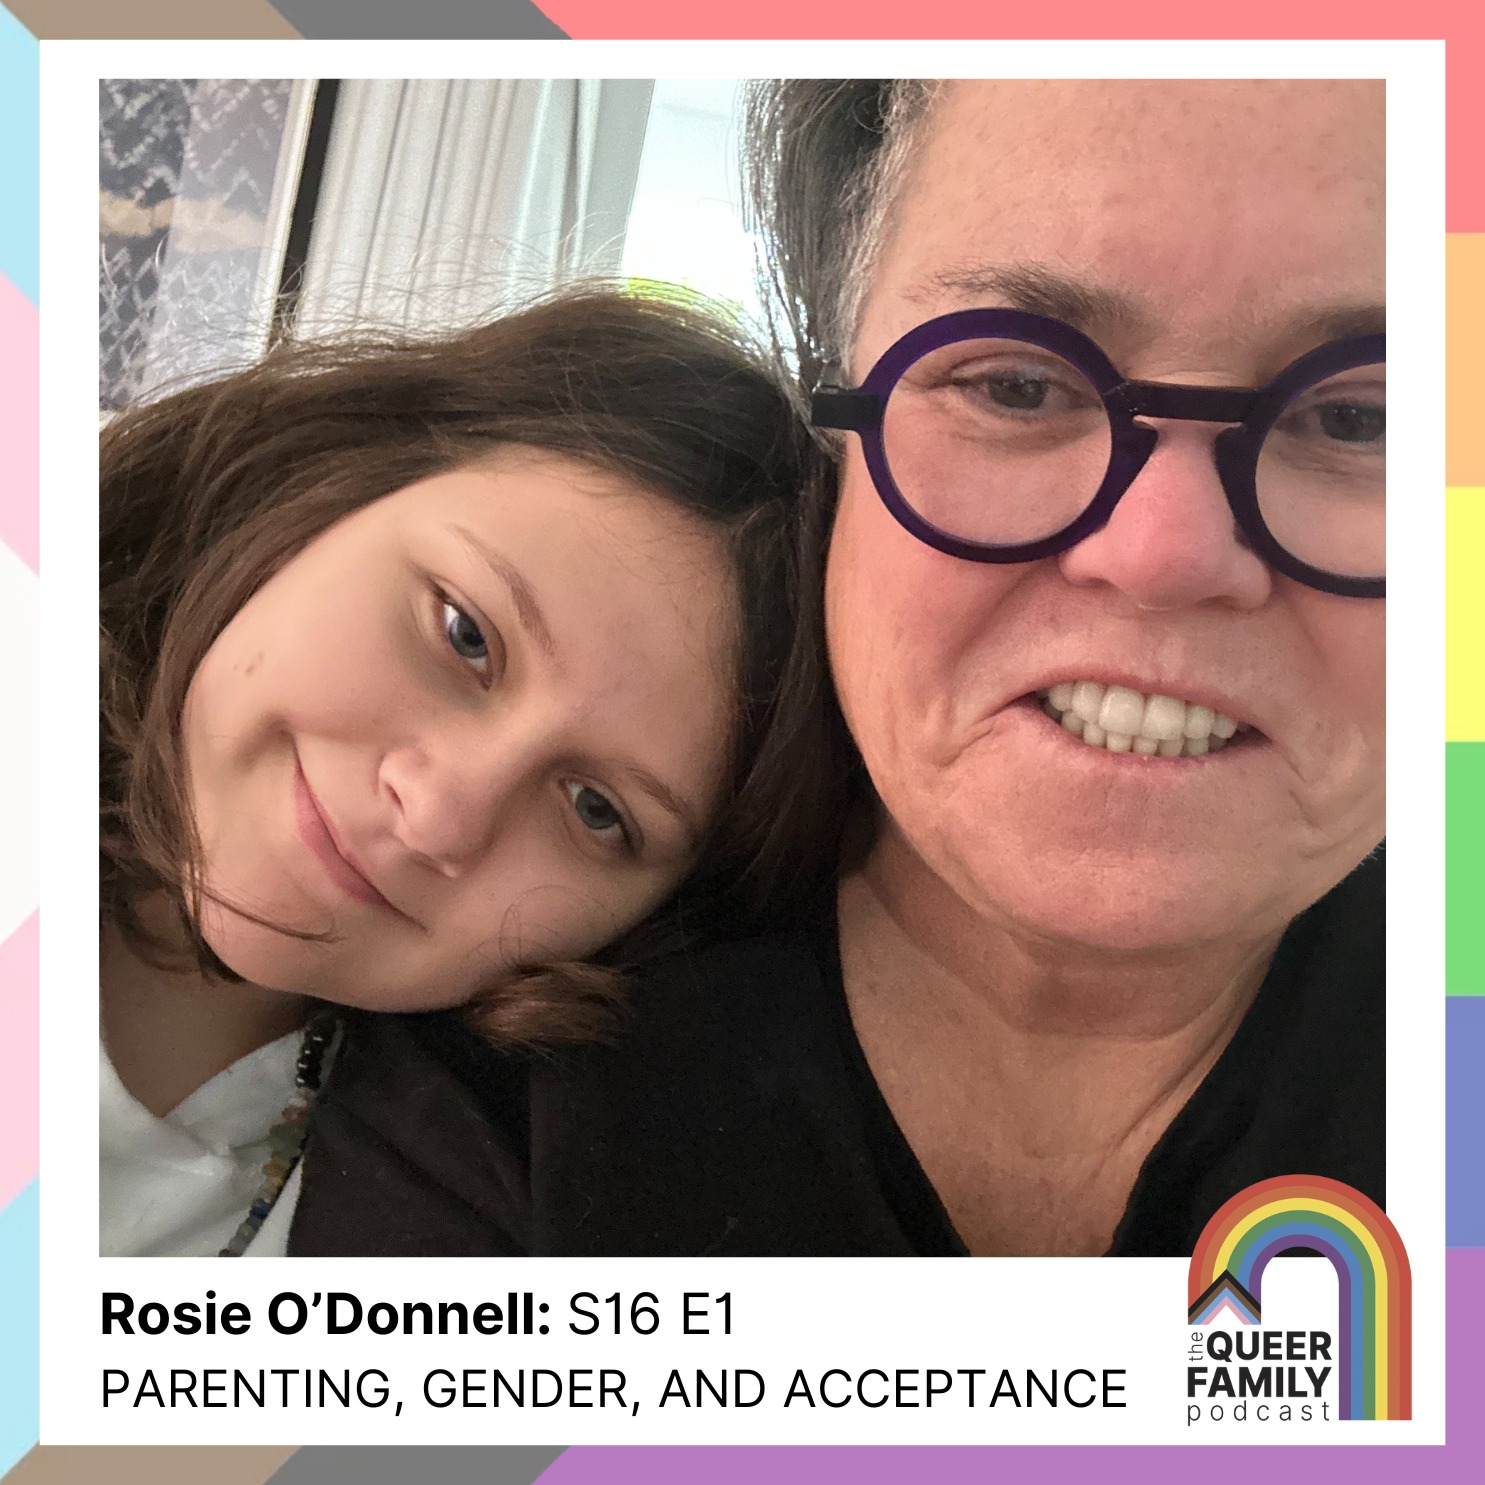 Rosie O'Donnell On Parenting, Gender, And Acceptance